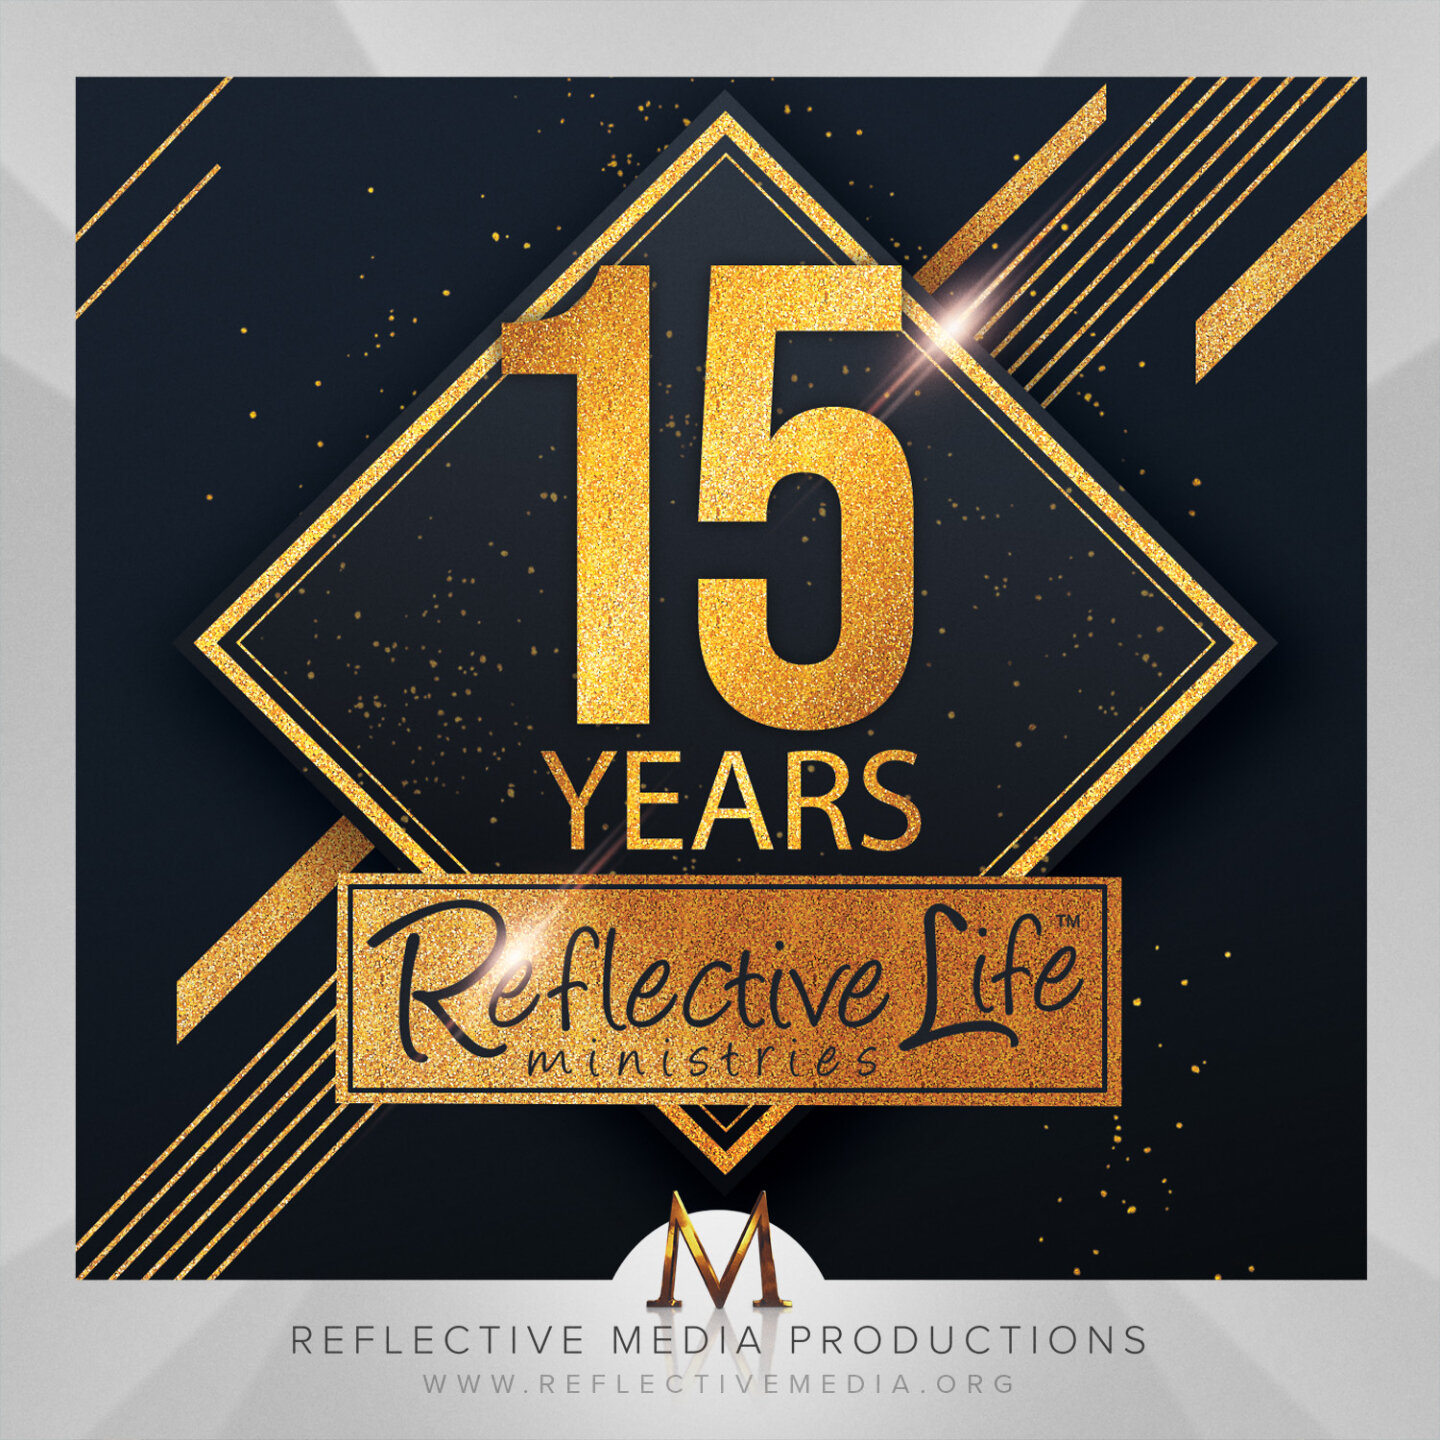 We want to wish you all a happy new year and we are so grateful to celebrate 15 years of Reflective Life Ministries and transforming lives into His reflection (2 Cor 3:18)!!! RLM is the non-profit parent ministry of Reflective Media Productions. The 